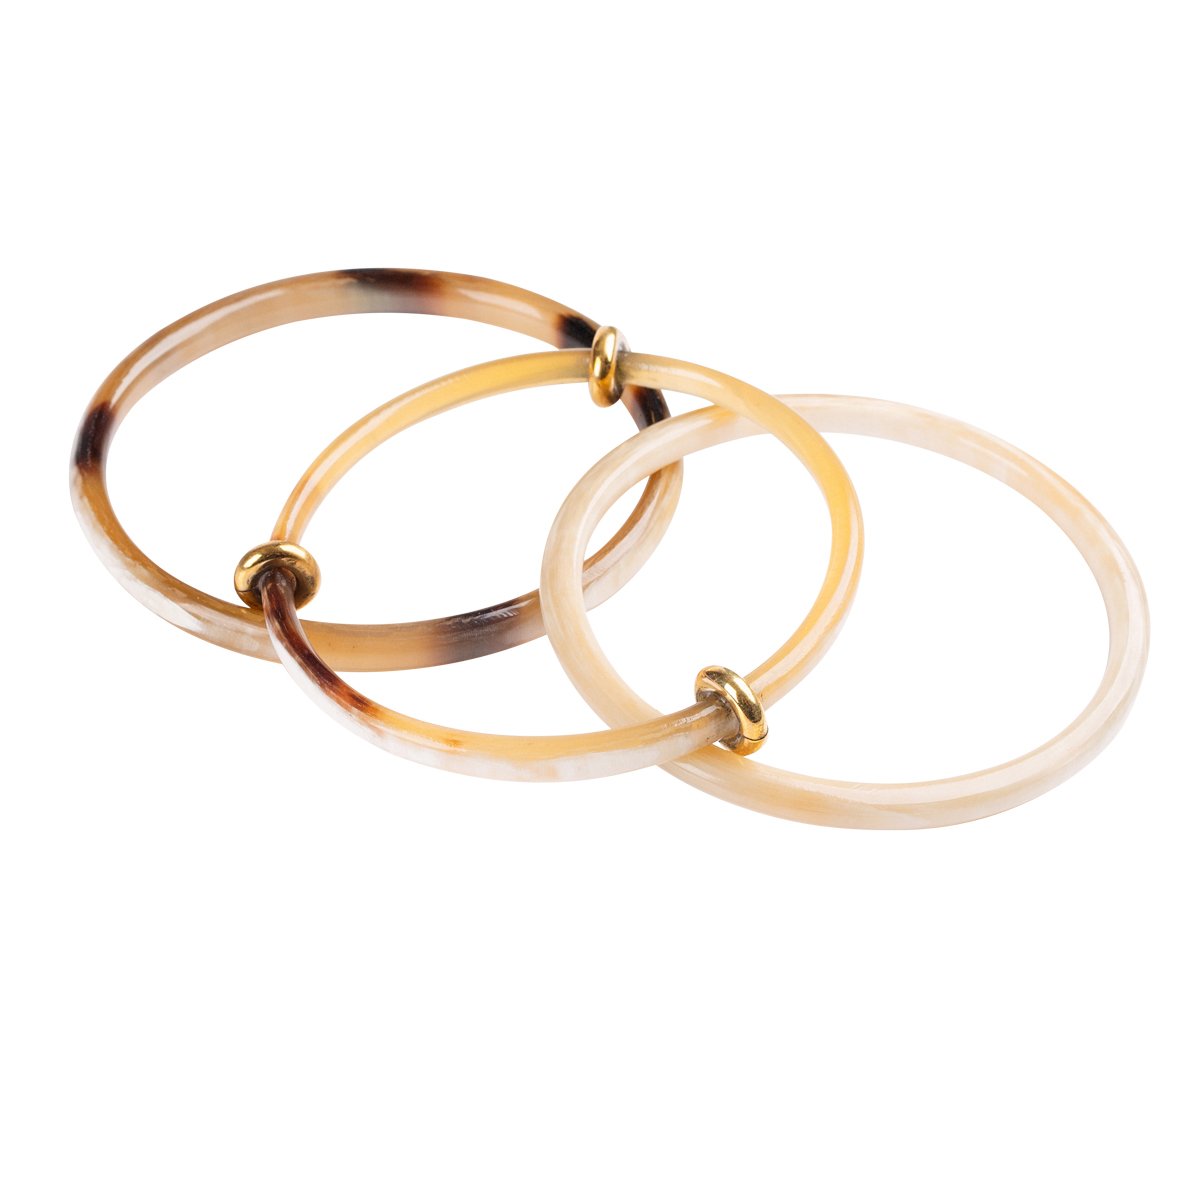 Bisque horn bangle